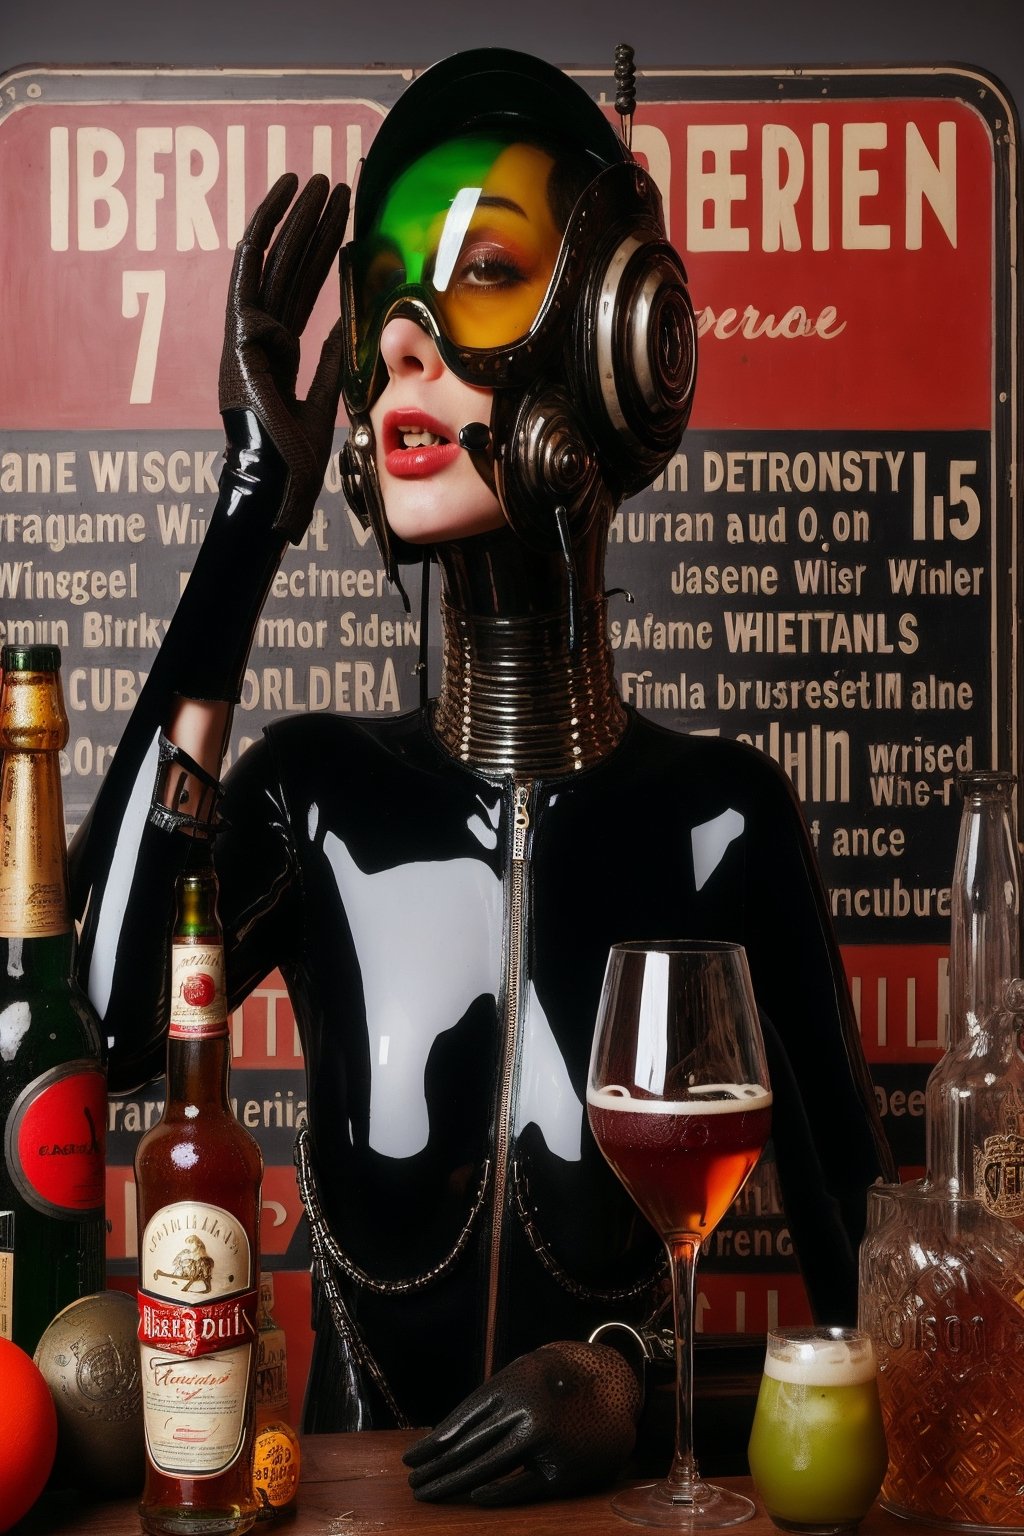 berlin megacity retro-futuristic and a strange aeon bar beer wine and fine whiskeys and coctails,she is wearing bizarre obscure wholebodyrubbersuitwithaccessories  fashion photo shoot